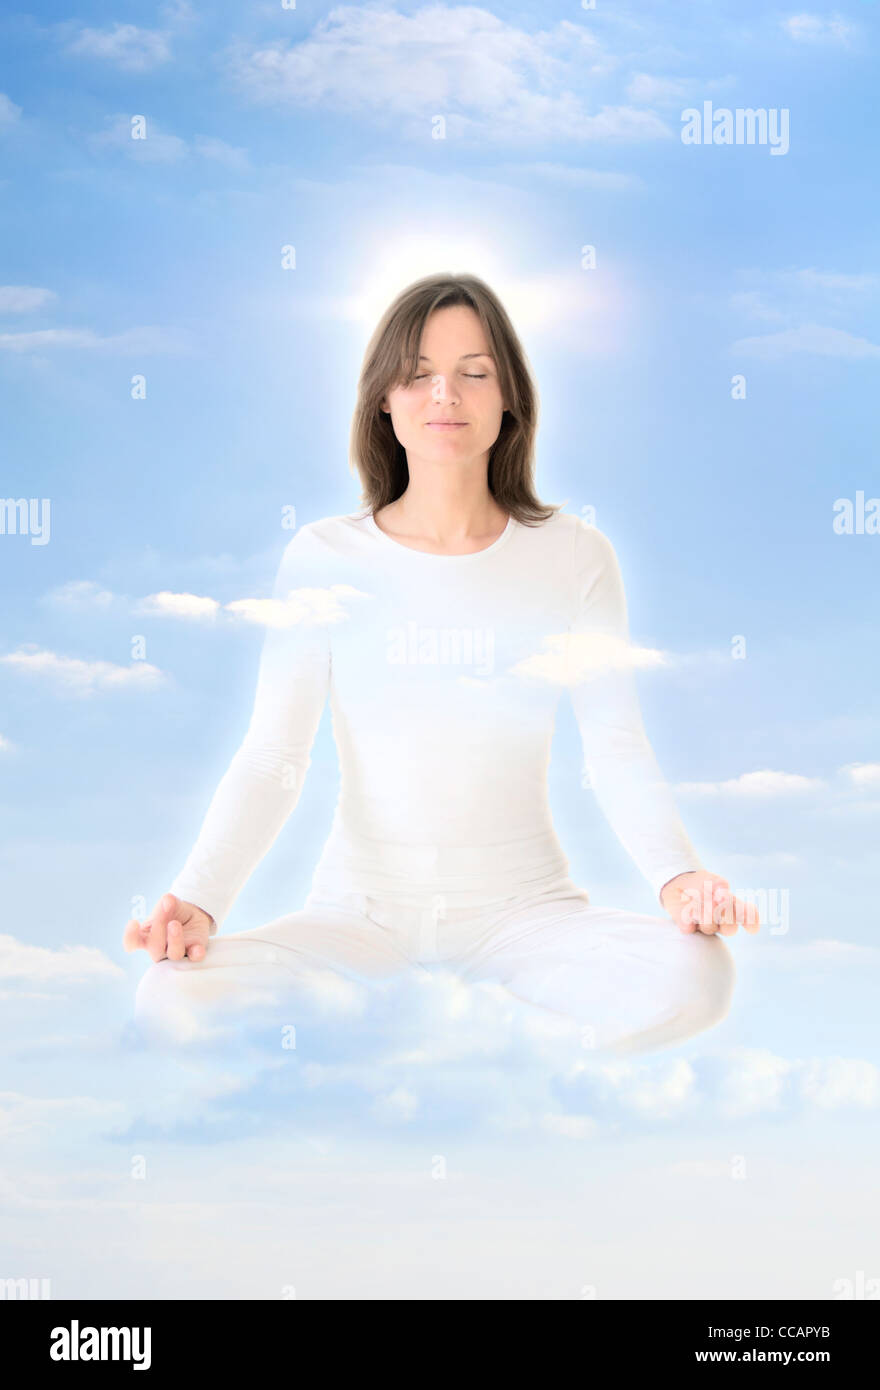 Download this stock image: Beautiful young girl meditating levitating in th...